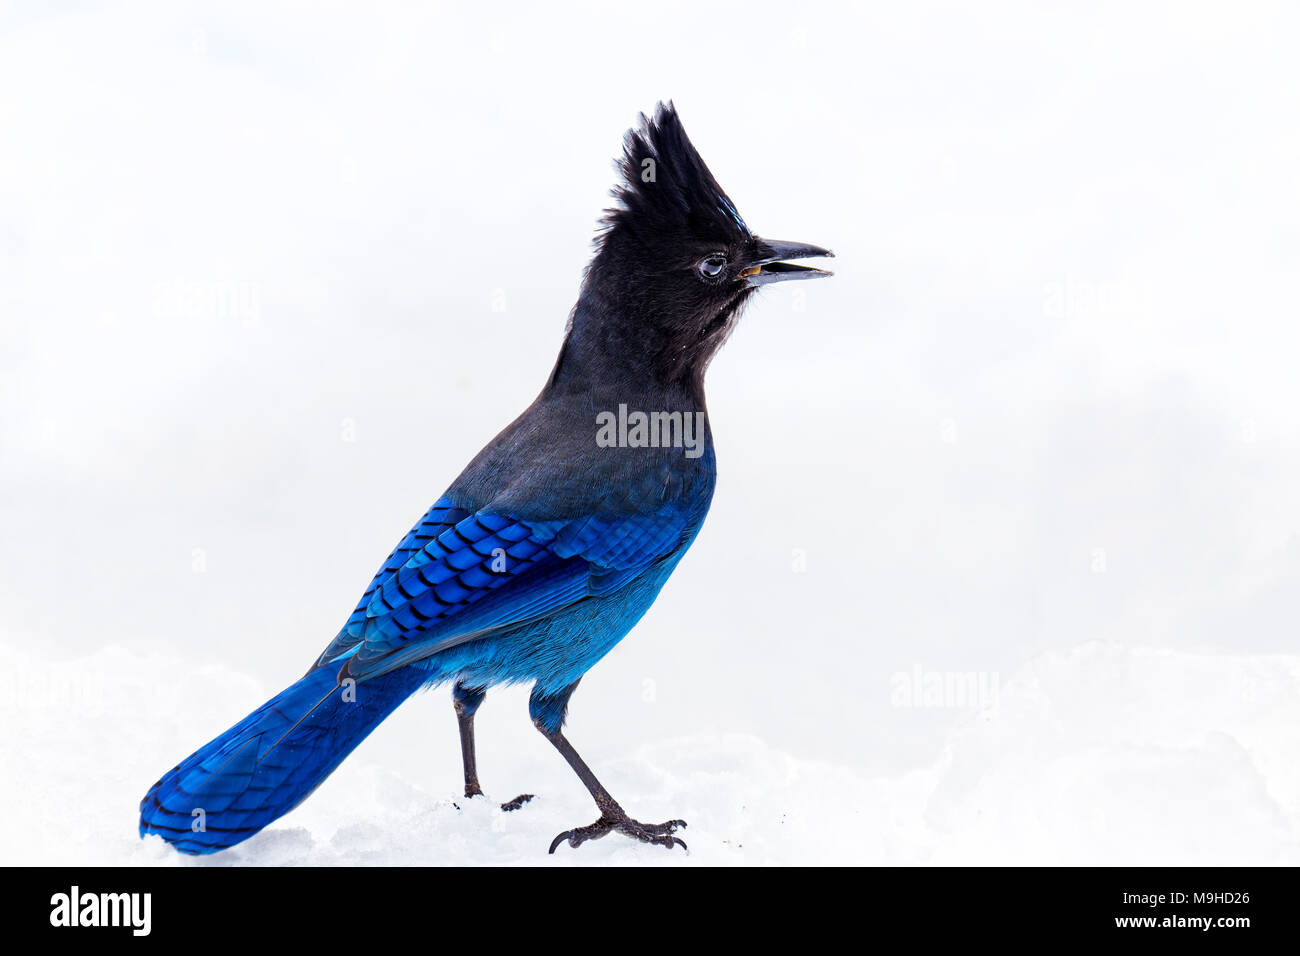 43,160.09777 close-up of a Steller’s Jay bird standing in winter snow, crested head gorgeous beautiful blue and black Stock Photo